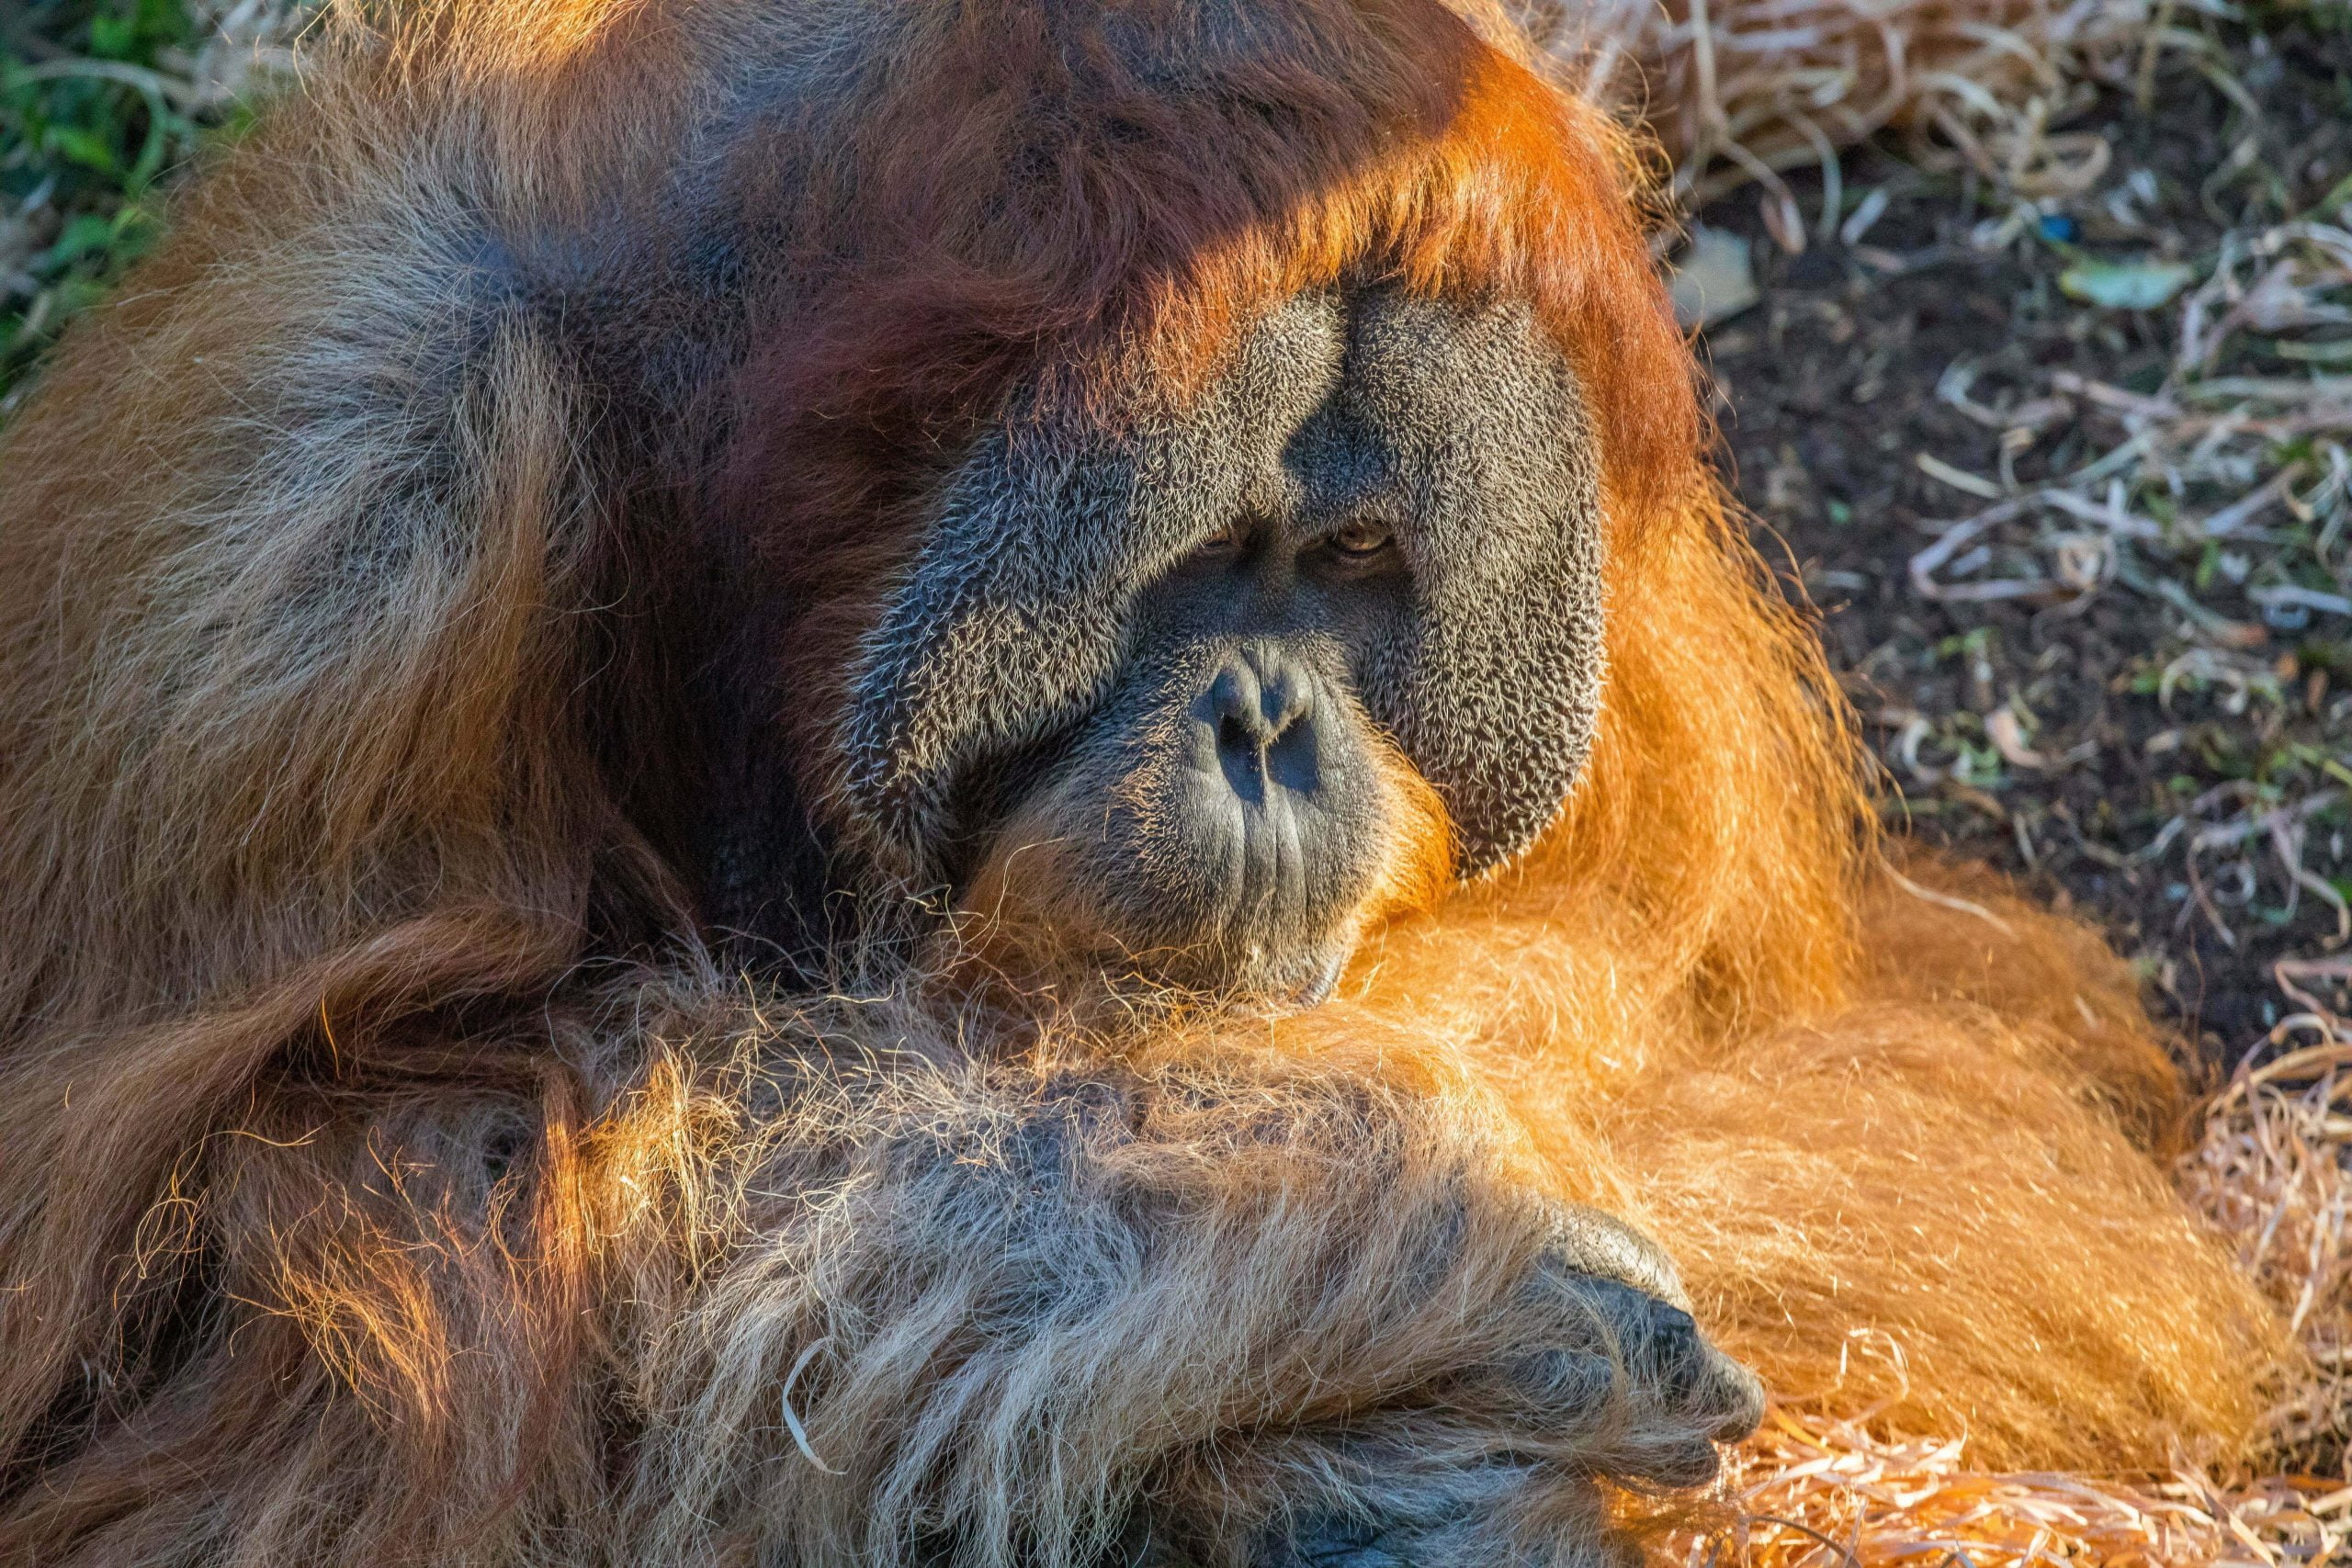 Even at iso 4000 the Canon 5D Mark IV has resolved every detail in this shot of an orangutan.  